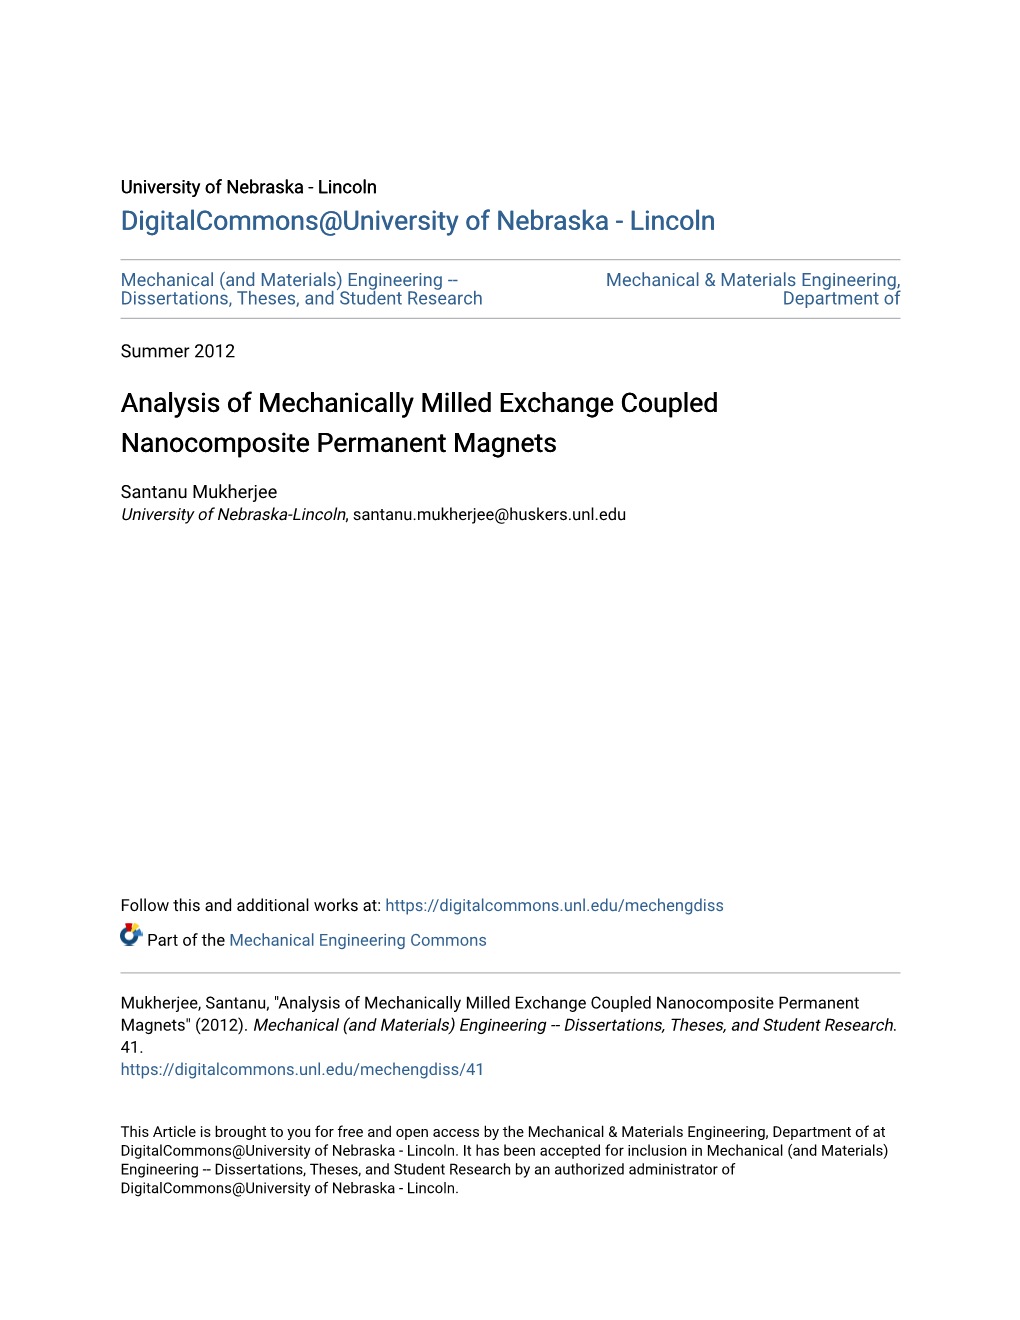 Analysis of Mechanically Milled Exchange Coupled Nanocomposite Permanent Magnets